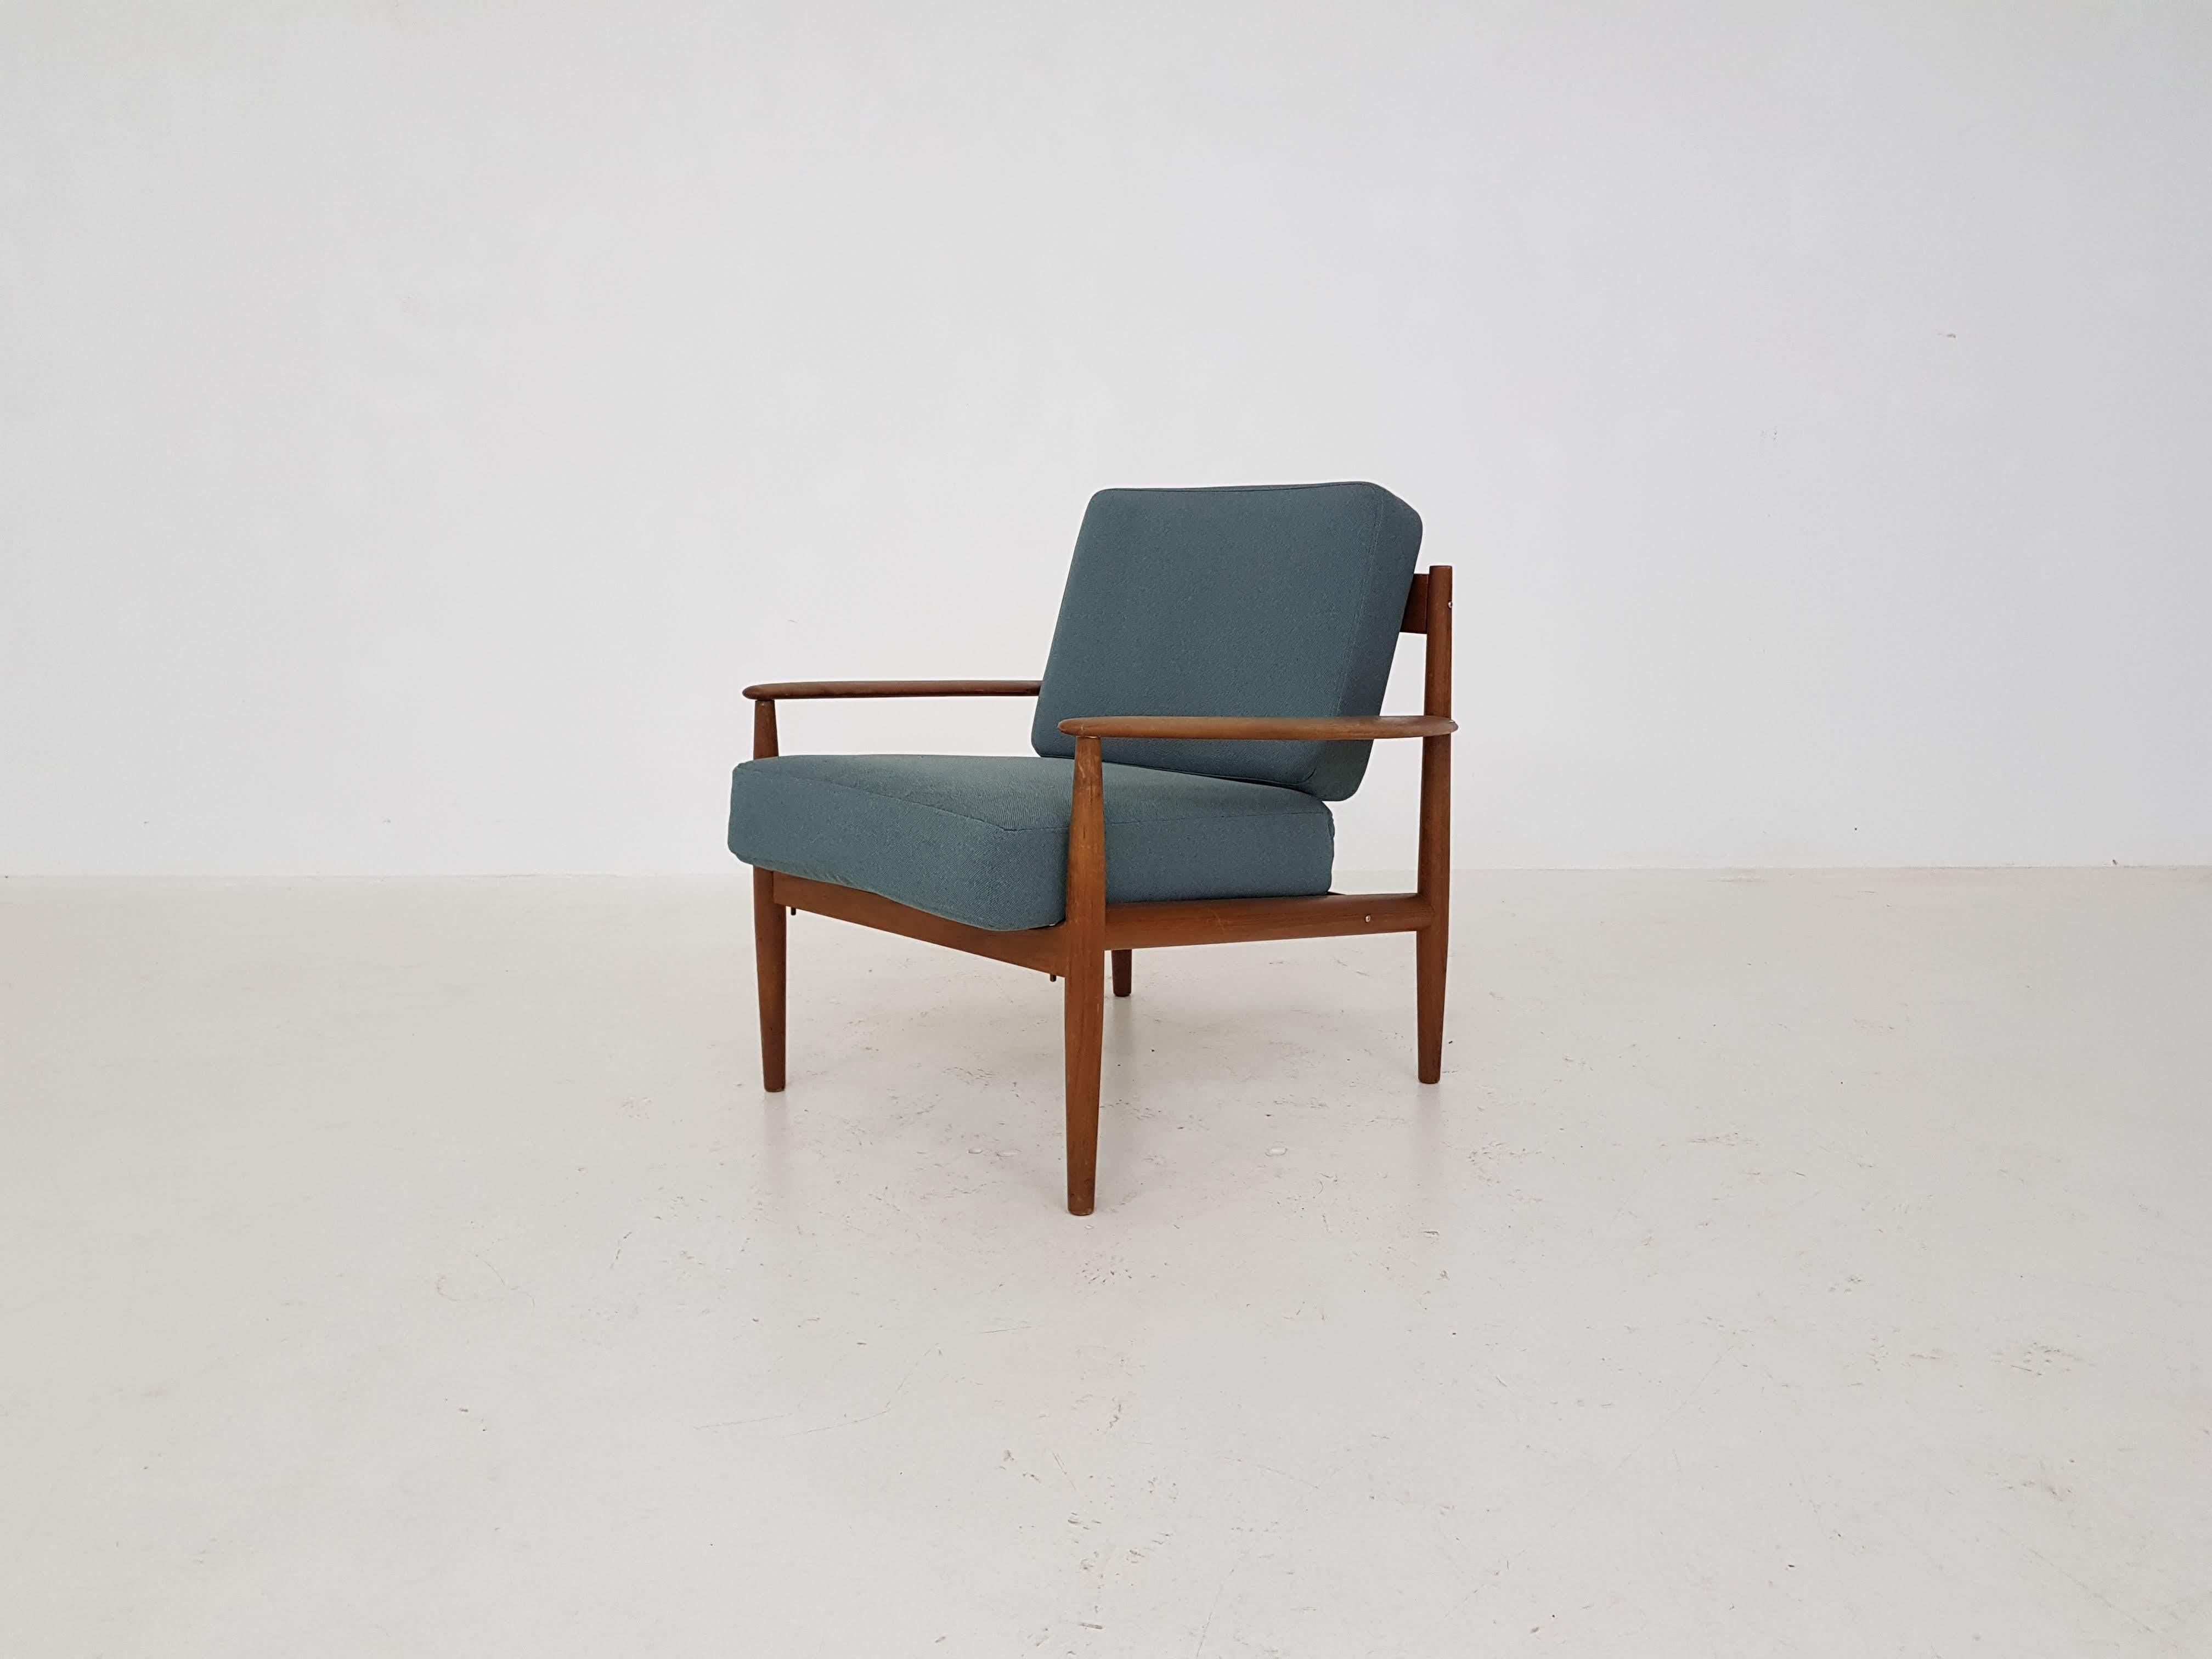 Grete Jalk for France and Sons lounge chair model 118, Denmark, 1960s.

Teak frame and cushions with new green upholstery. The lounge chair hasn't got the original screws.

Measures: Width 79 cm; seating: 54 cm

Depth 75 cm; seating: 50 cm

Height